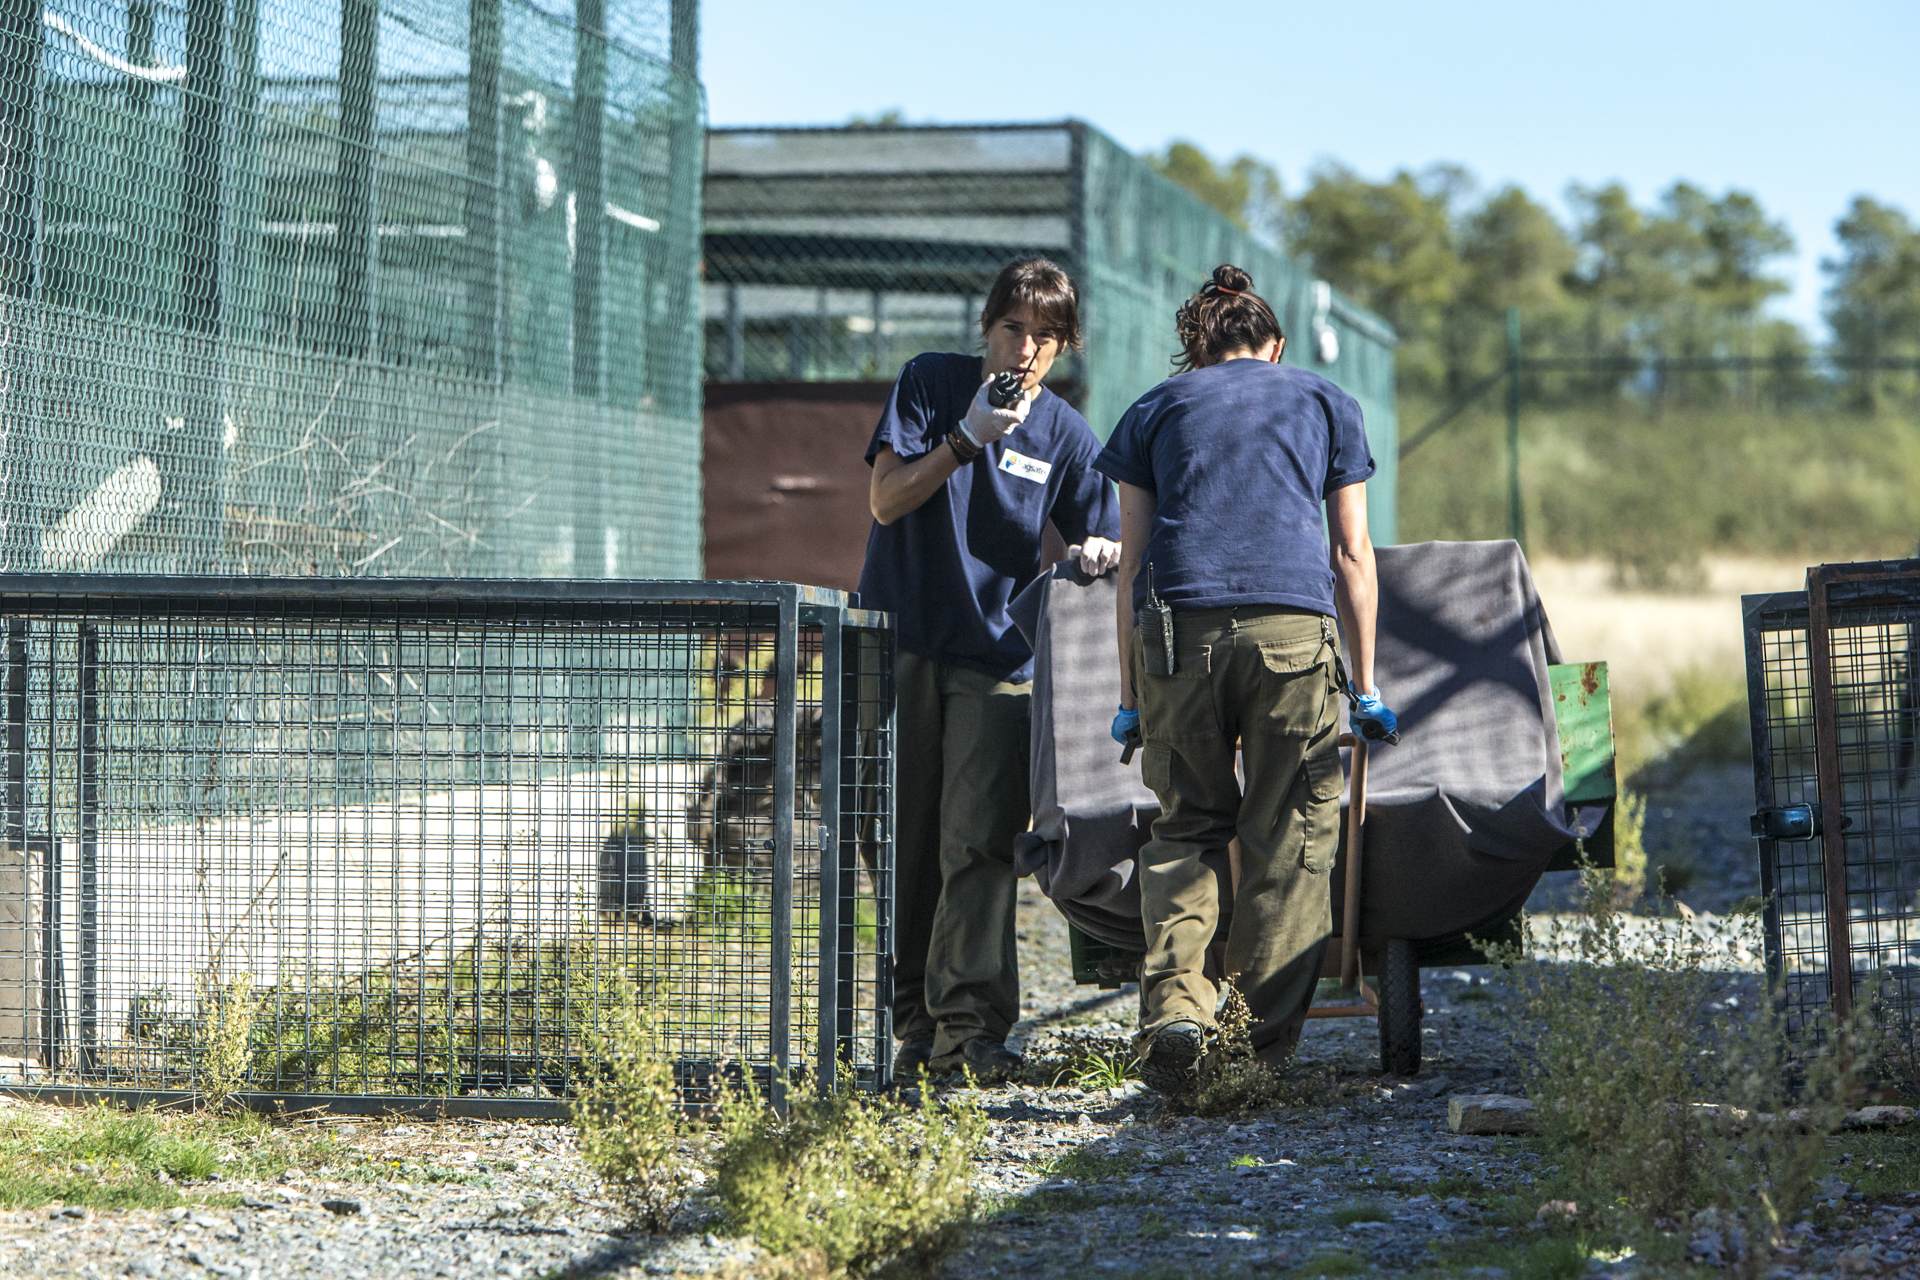  The breeding facilities are incredibly secure, here a lynx is moved between enclosures by workers.&nbsp; 